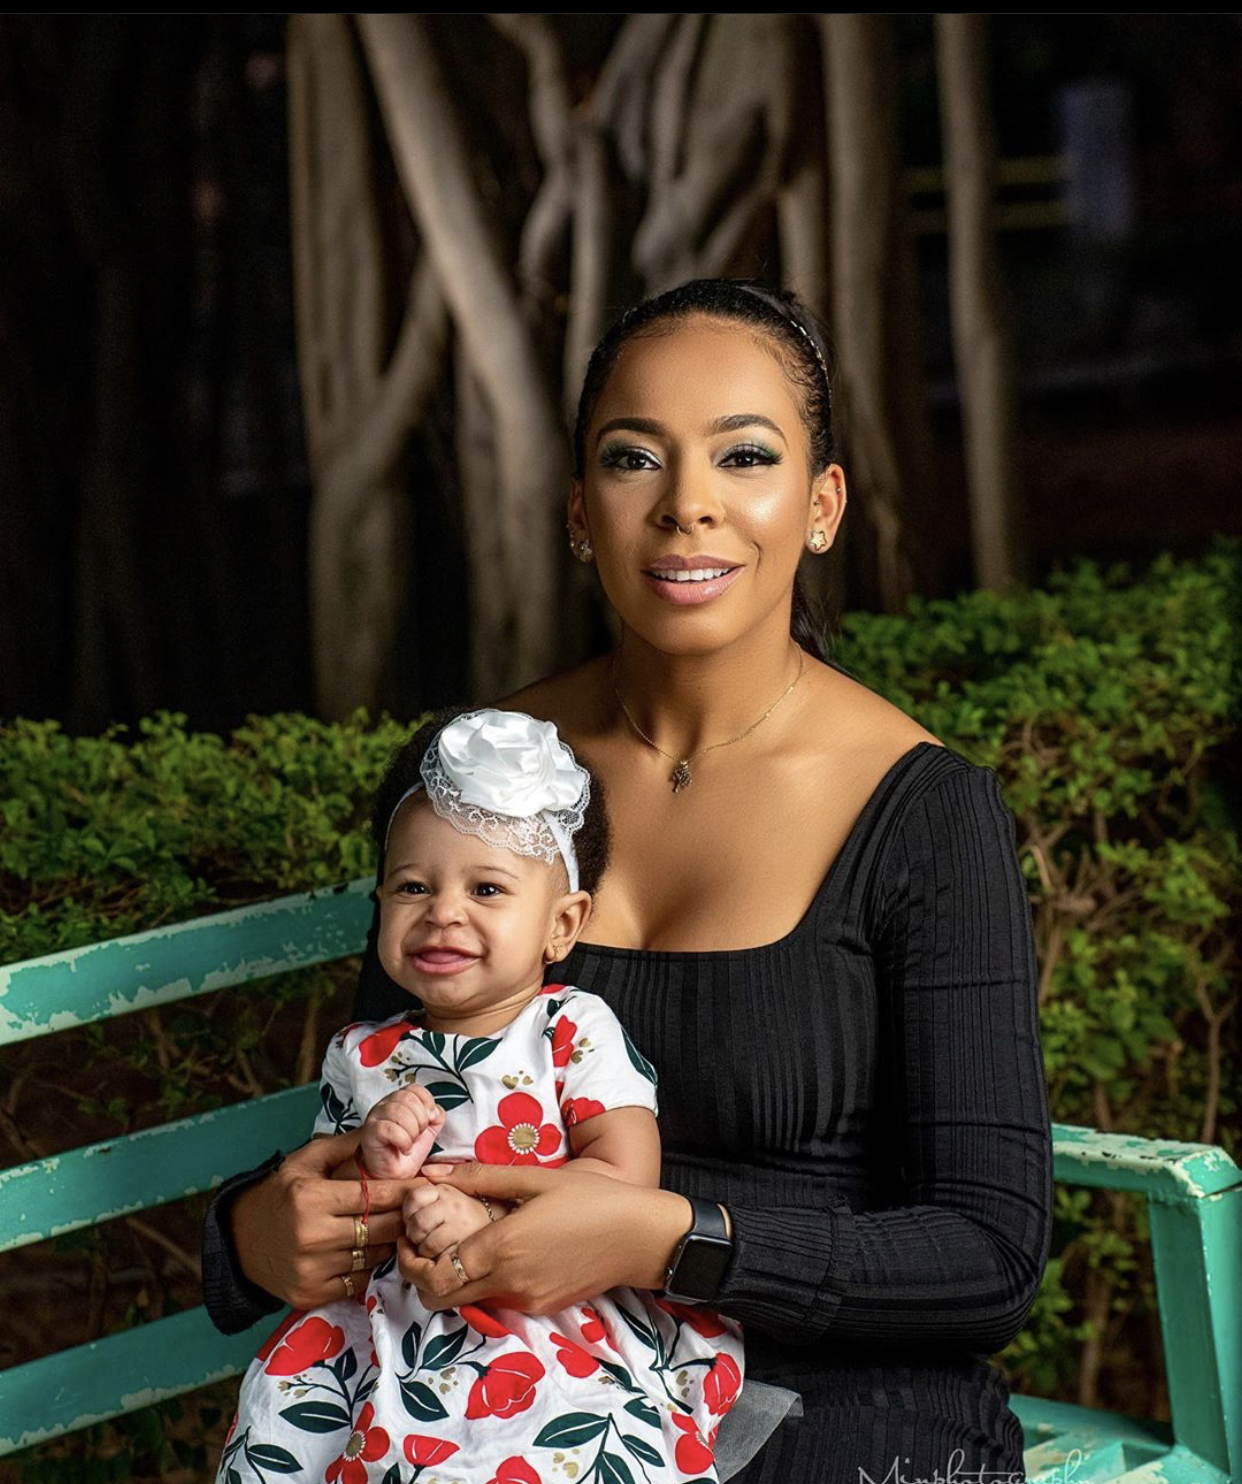 Tboss and her daughter, Rumi